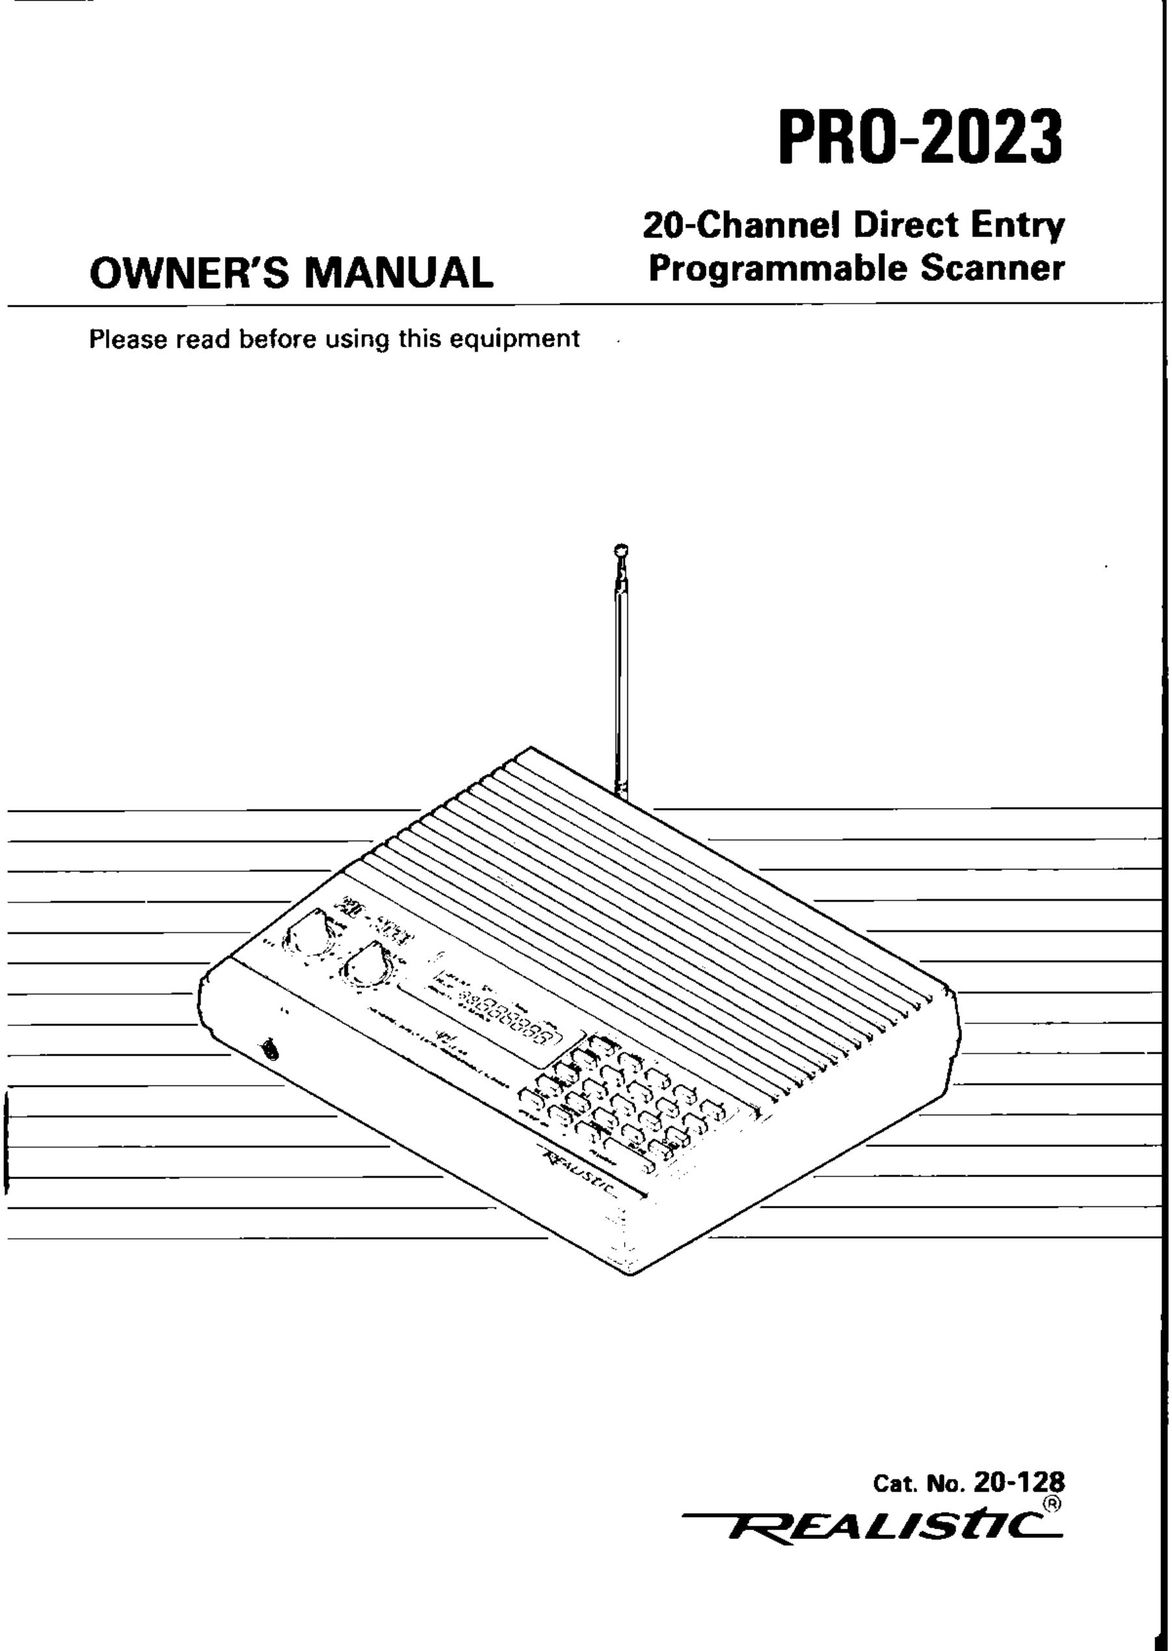 Realistic PRO-2023 Scanner User Manual